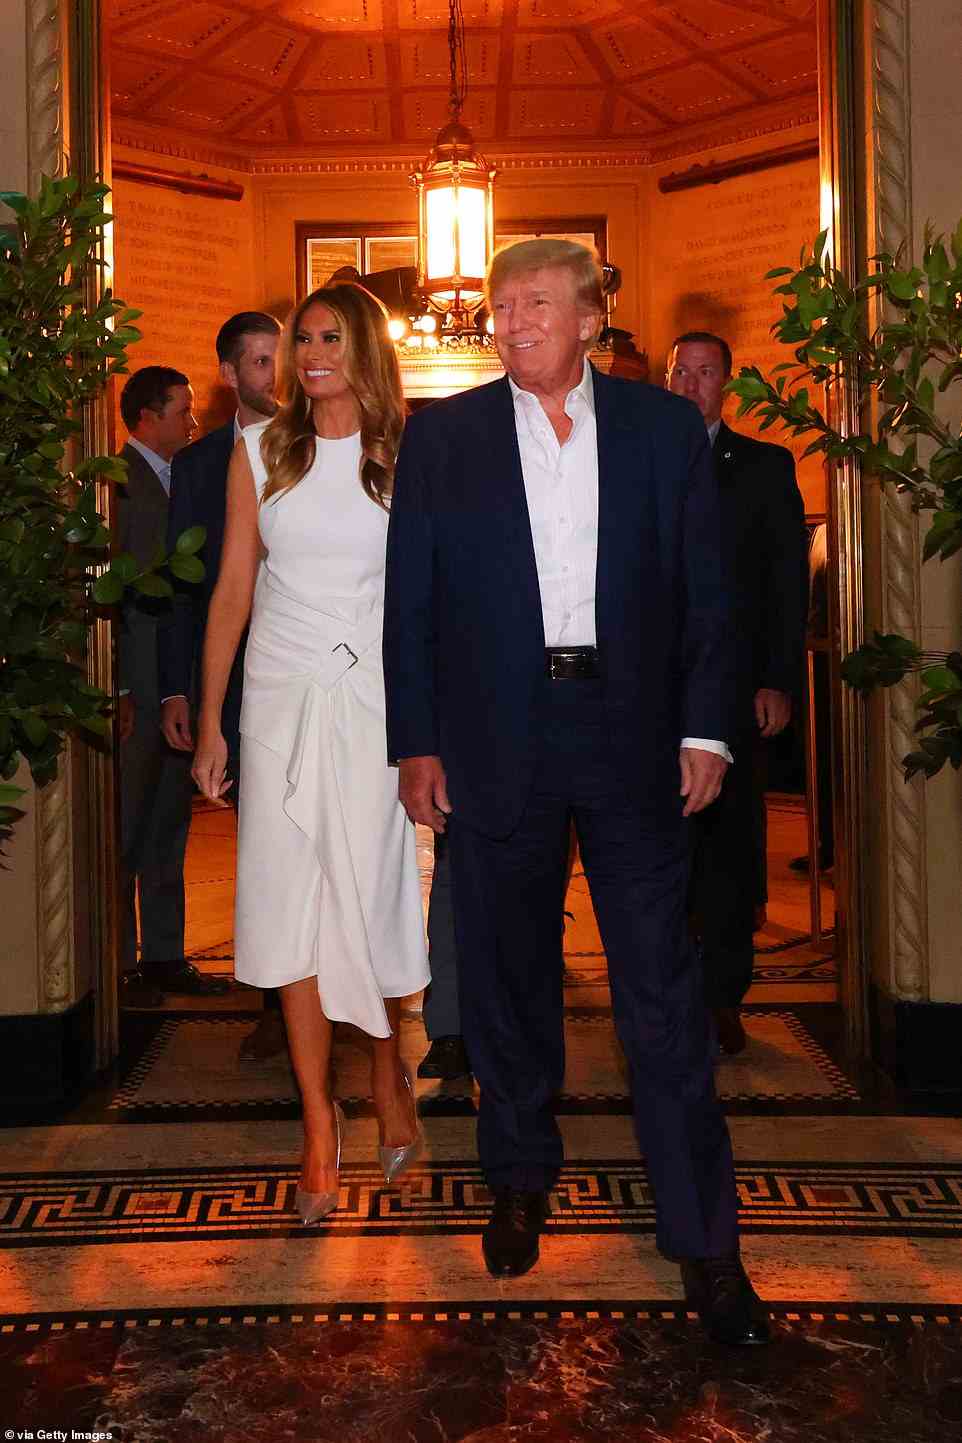 Trump and his wife Melania are seen on Wednesday night arriving at the welcome party in Manhattan